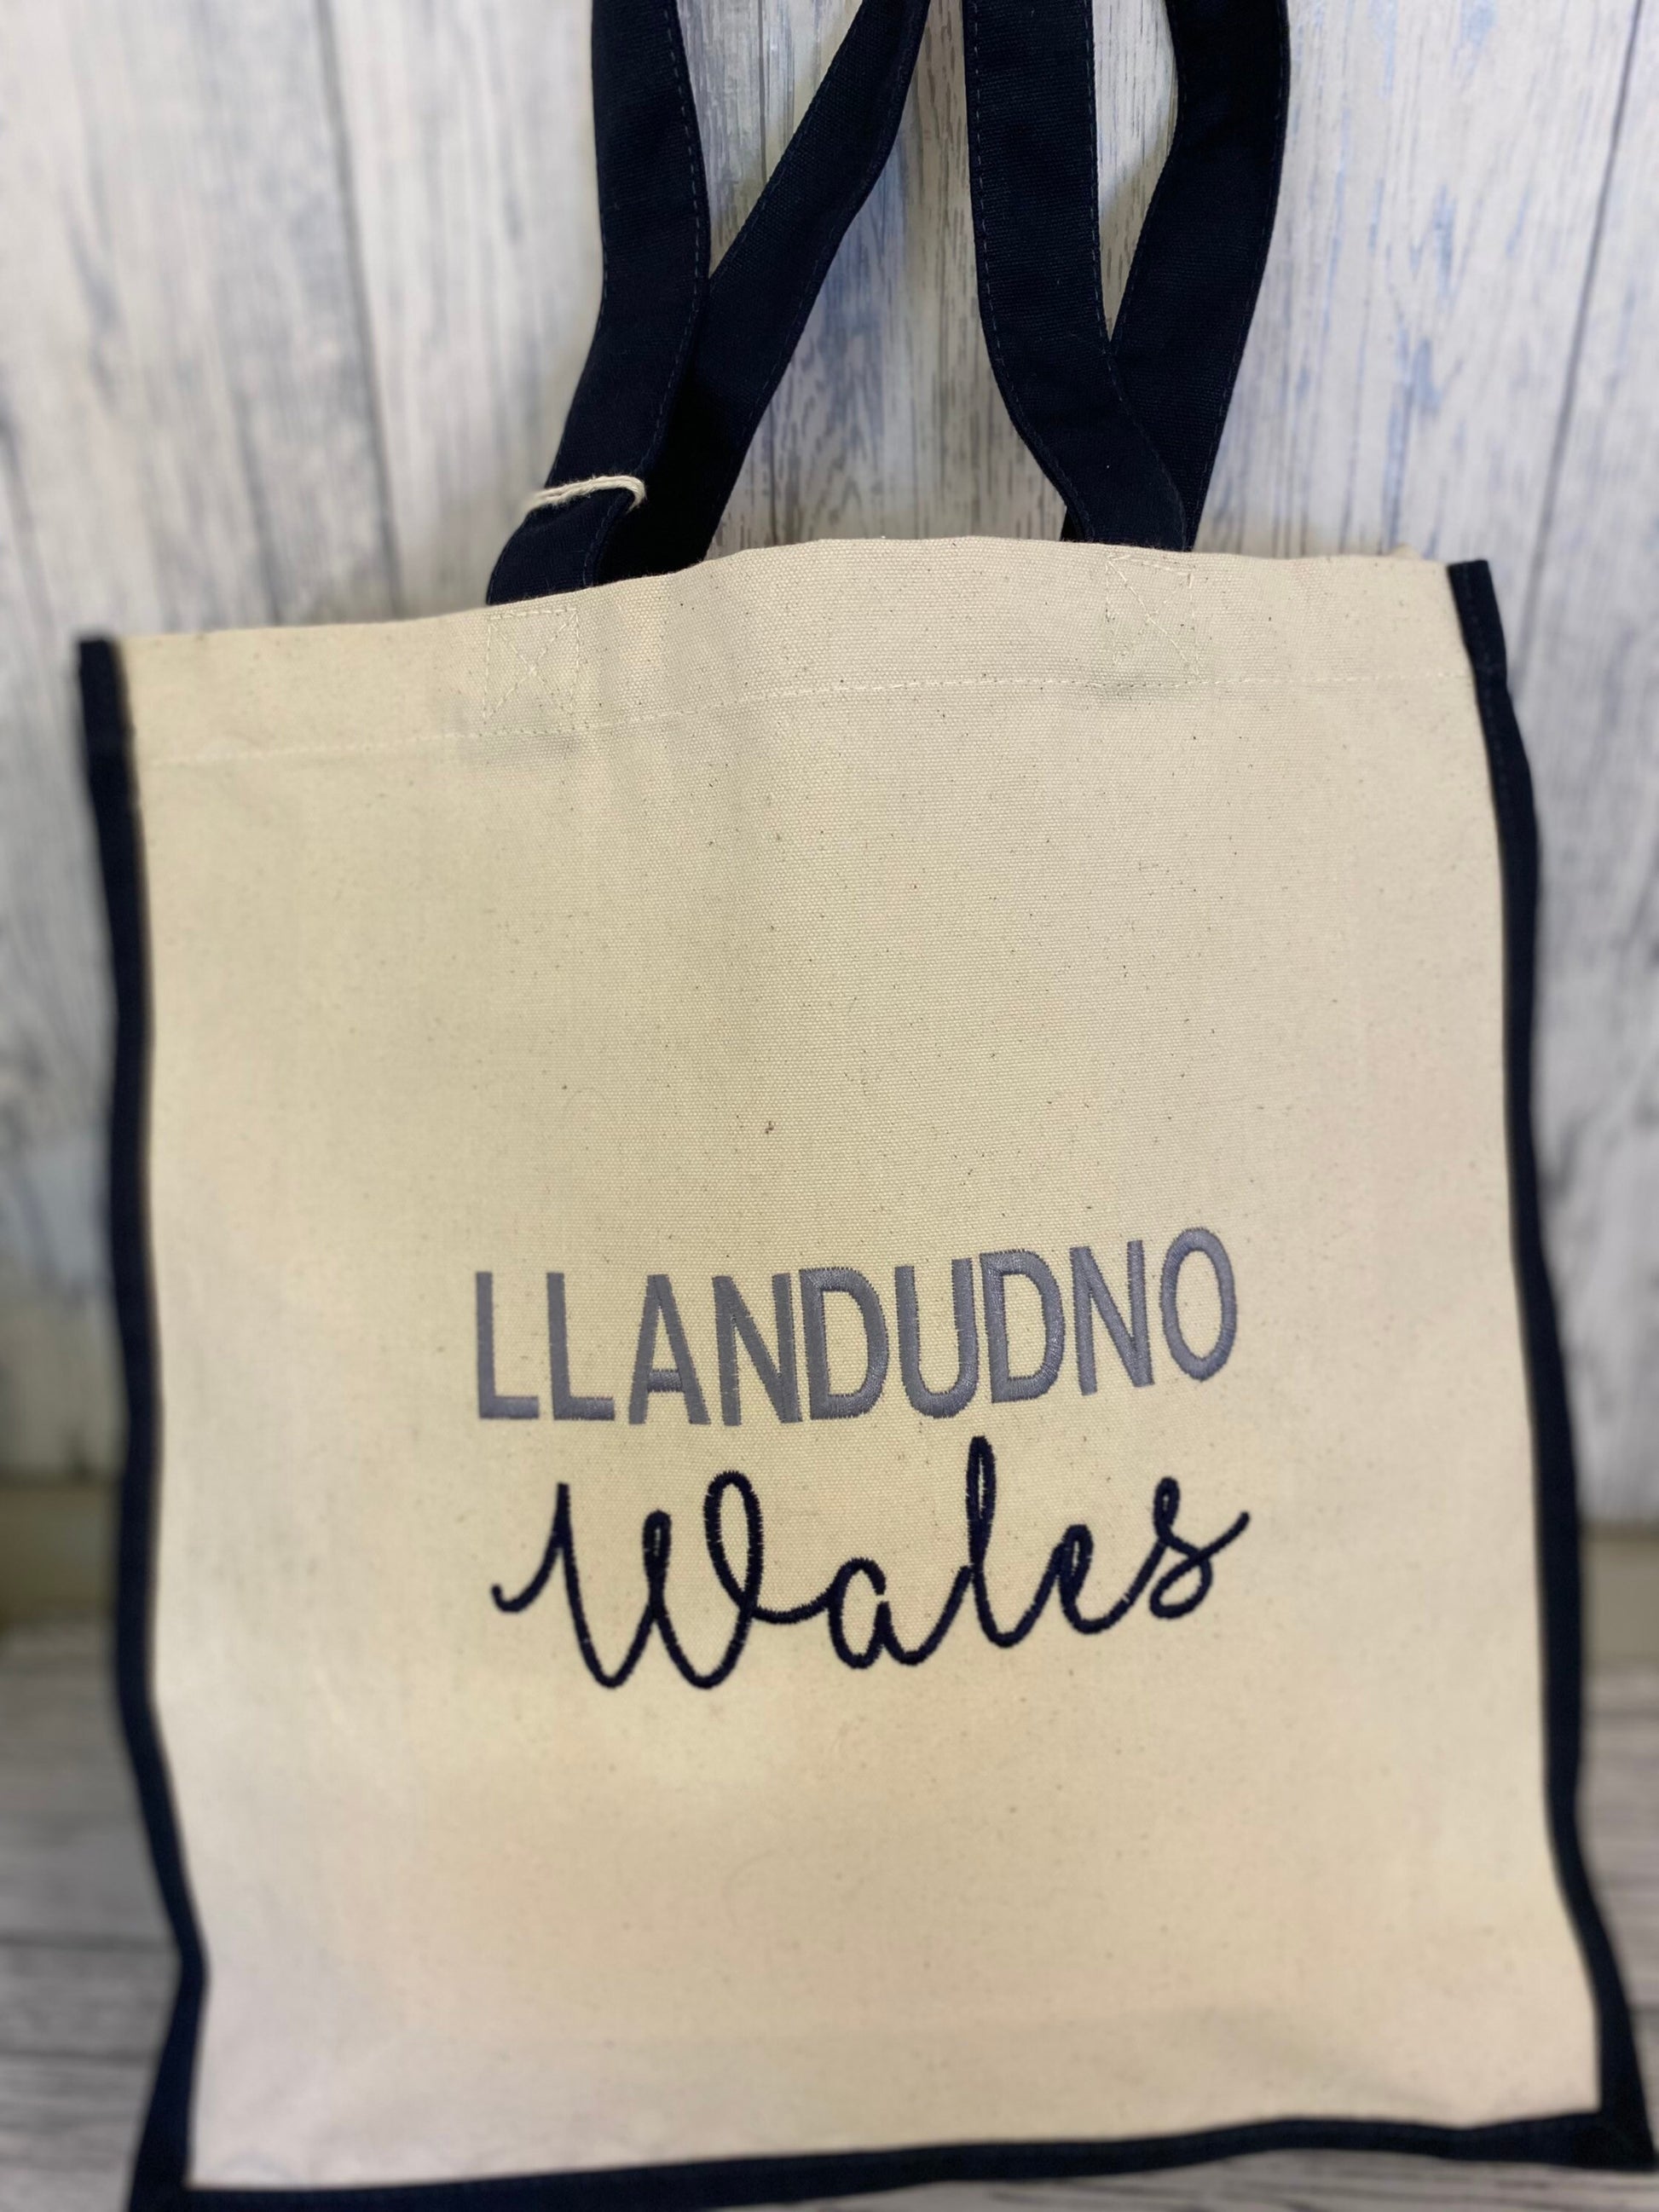 Location shopper tote bag Llandudno Wales large canvas shopper cream with navy blue sides and handles and embroidered lettering